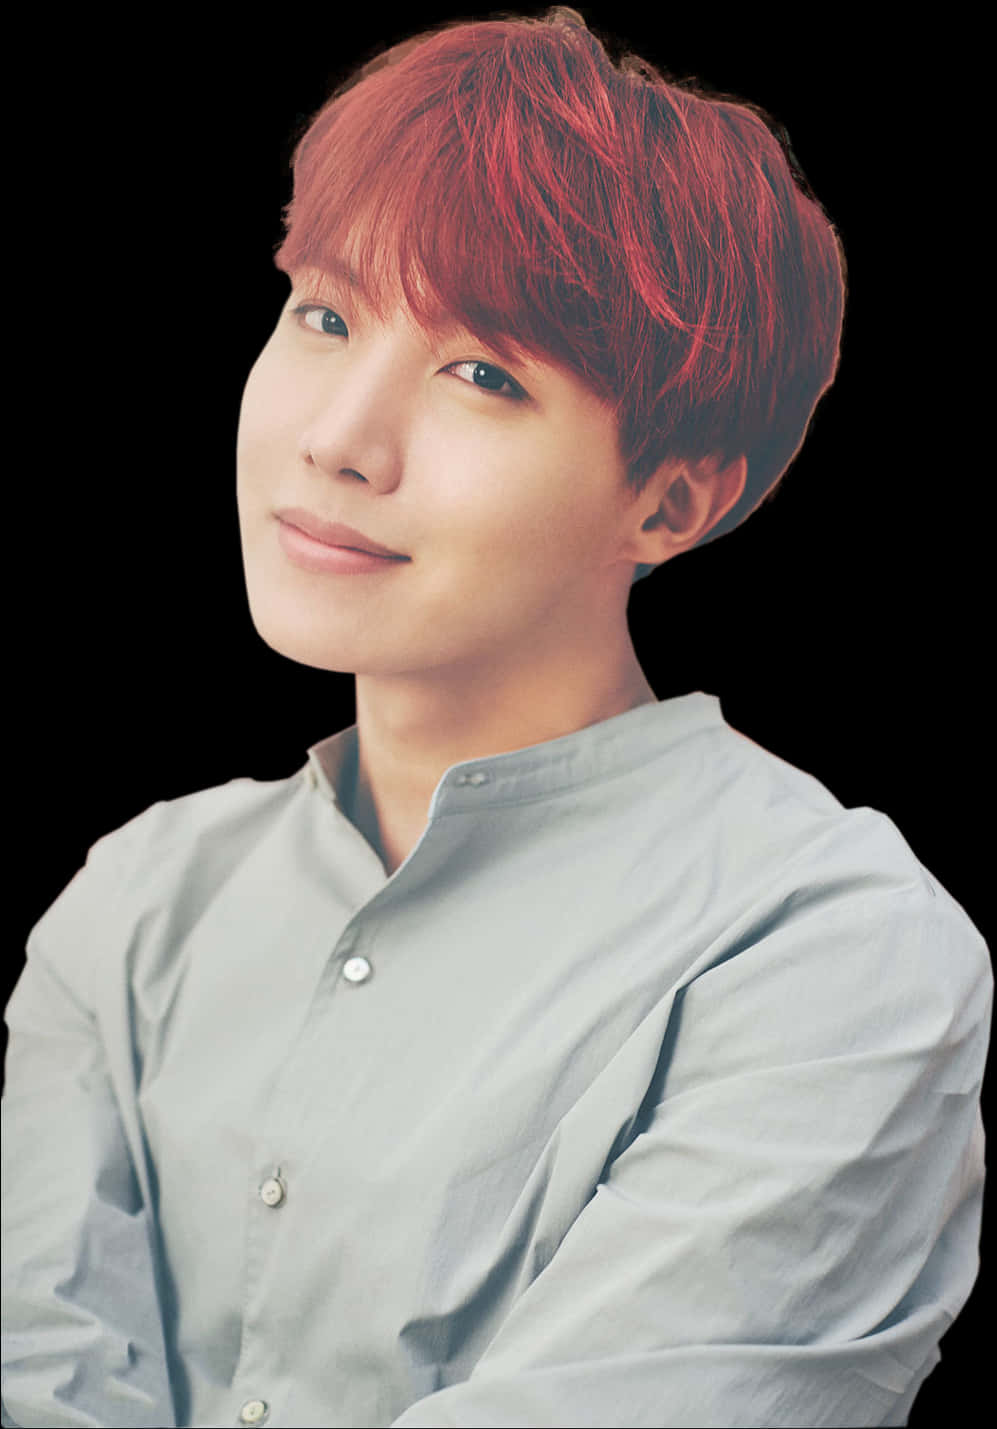 Red Haired Manin Gray Shirt PNG